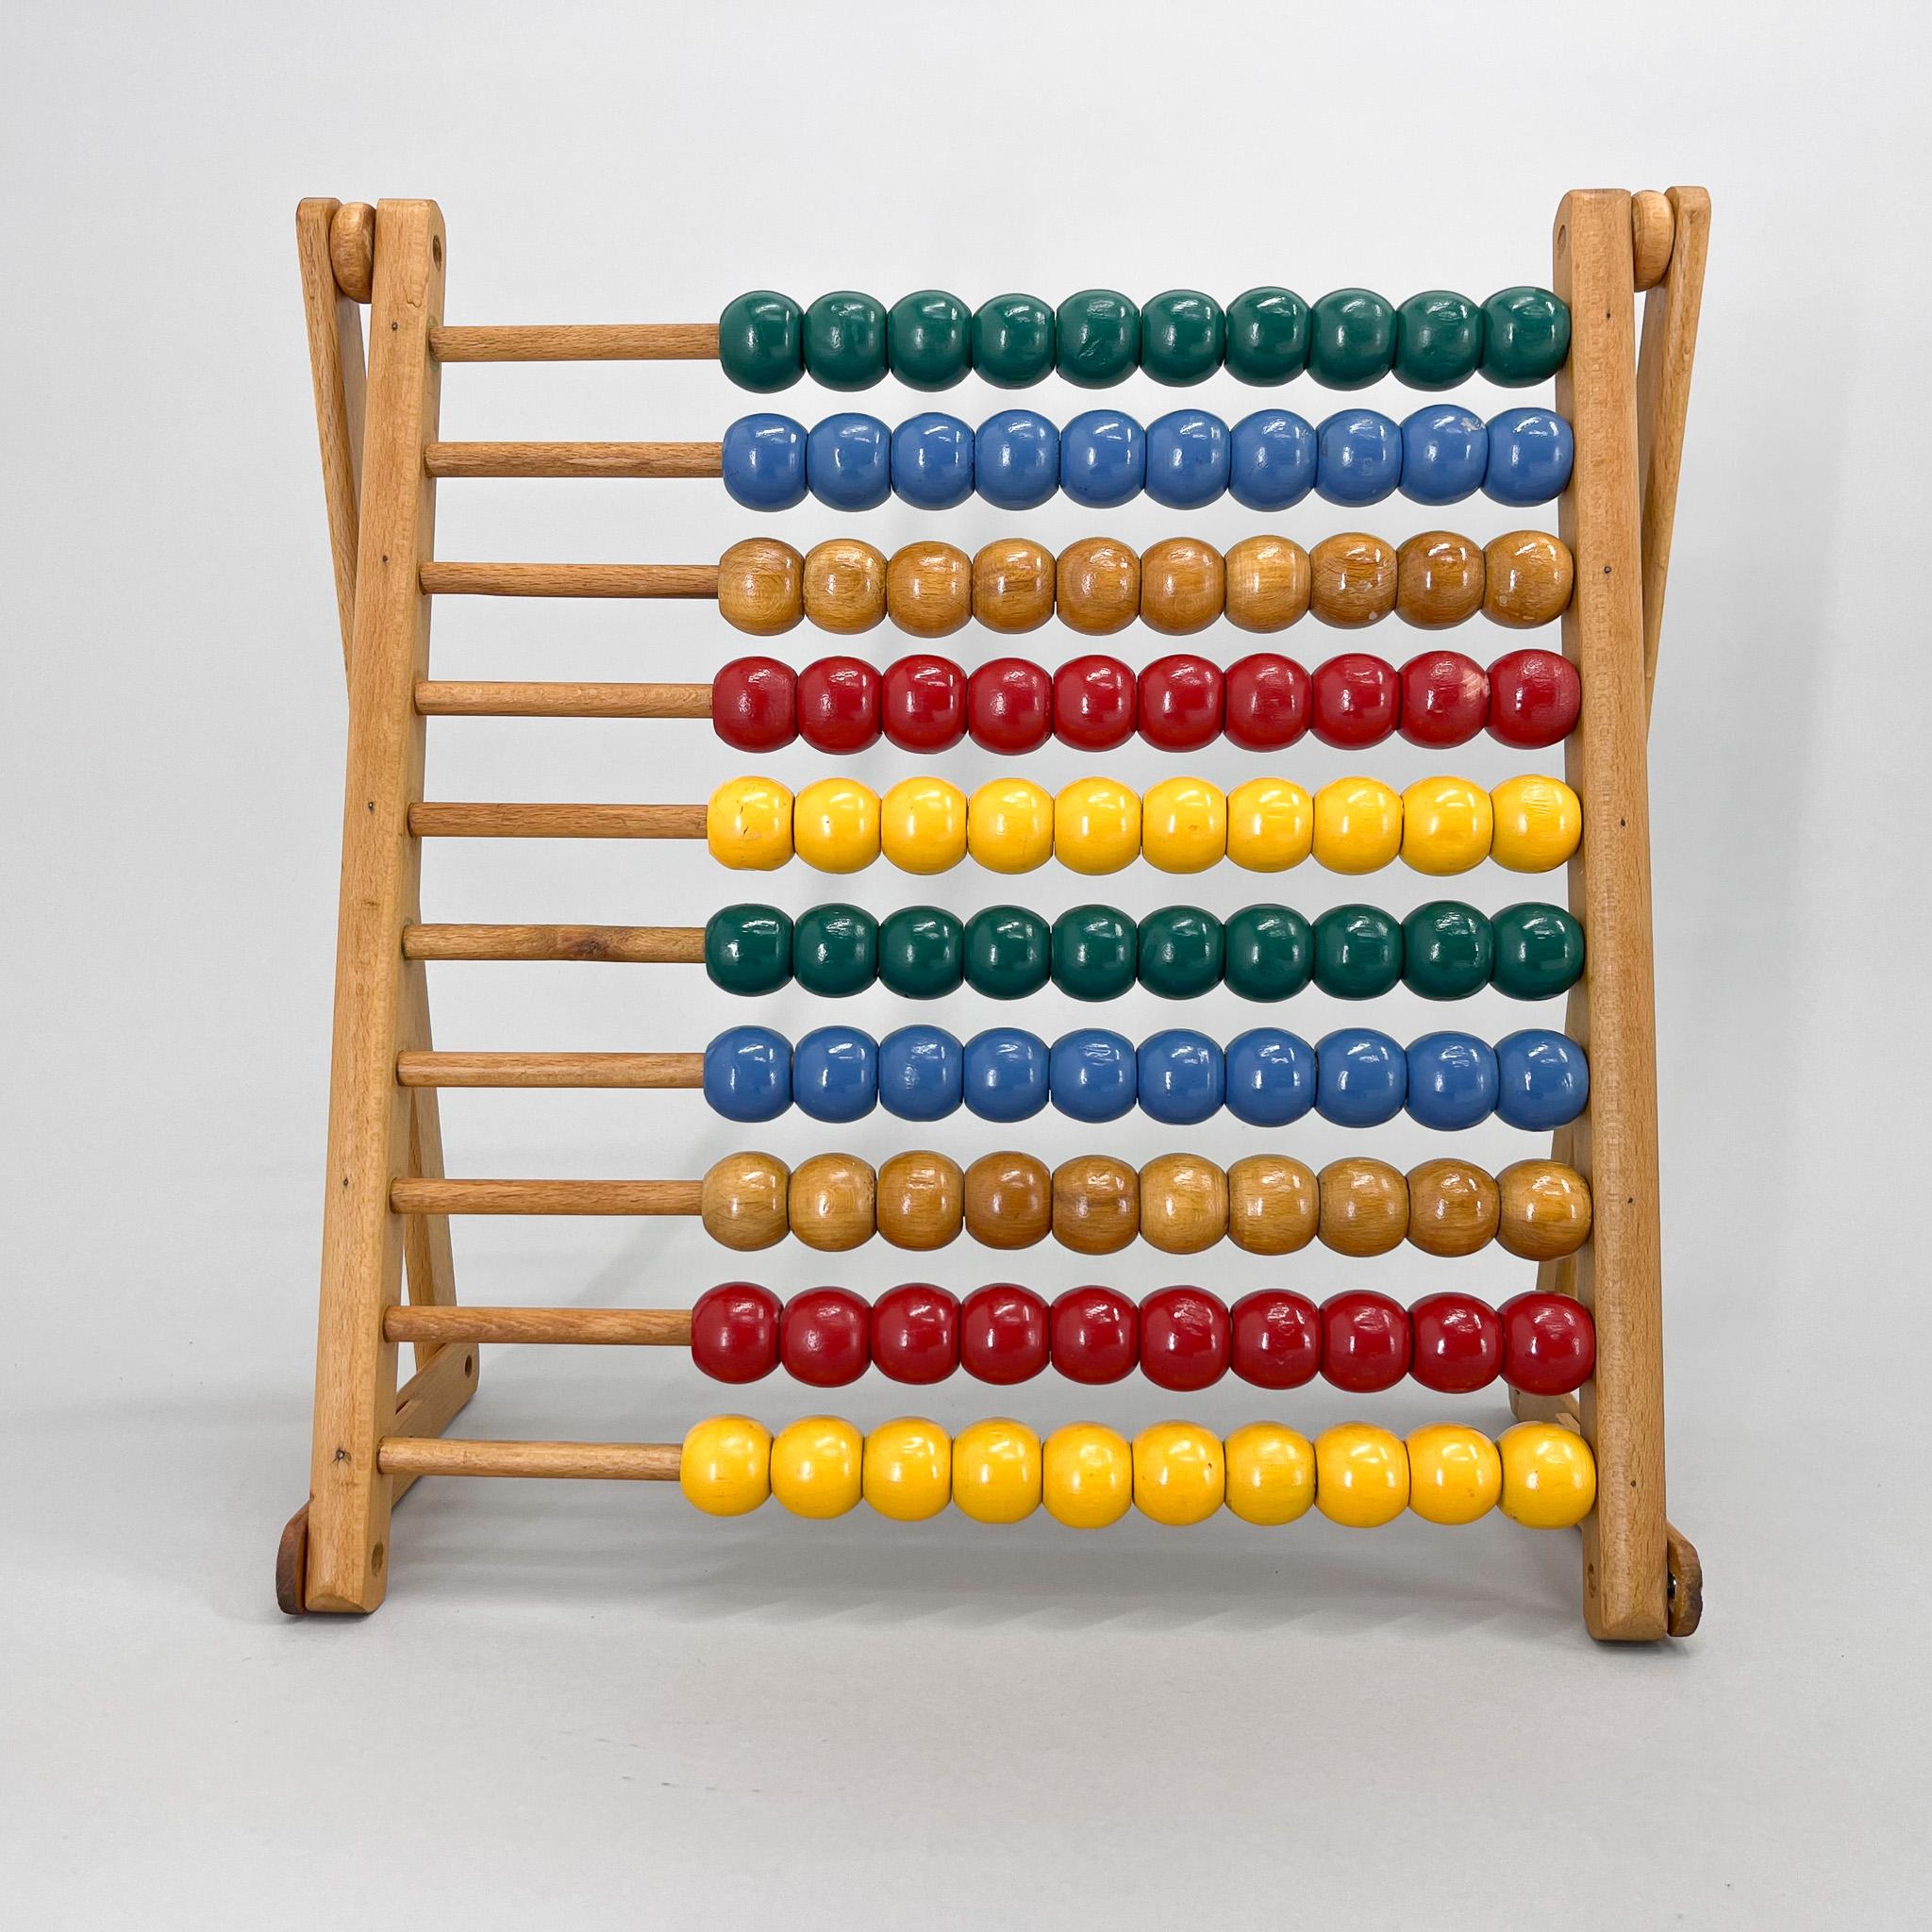 Mid century wooden colorful abacus that was used in schools in the 1970s. Can be folded as shown in the pictures. Good original condition.